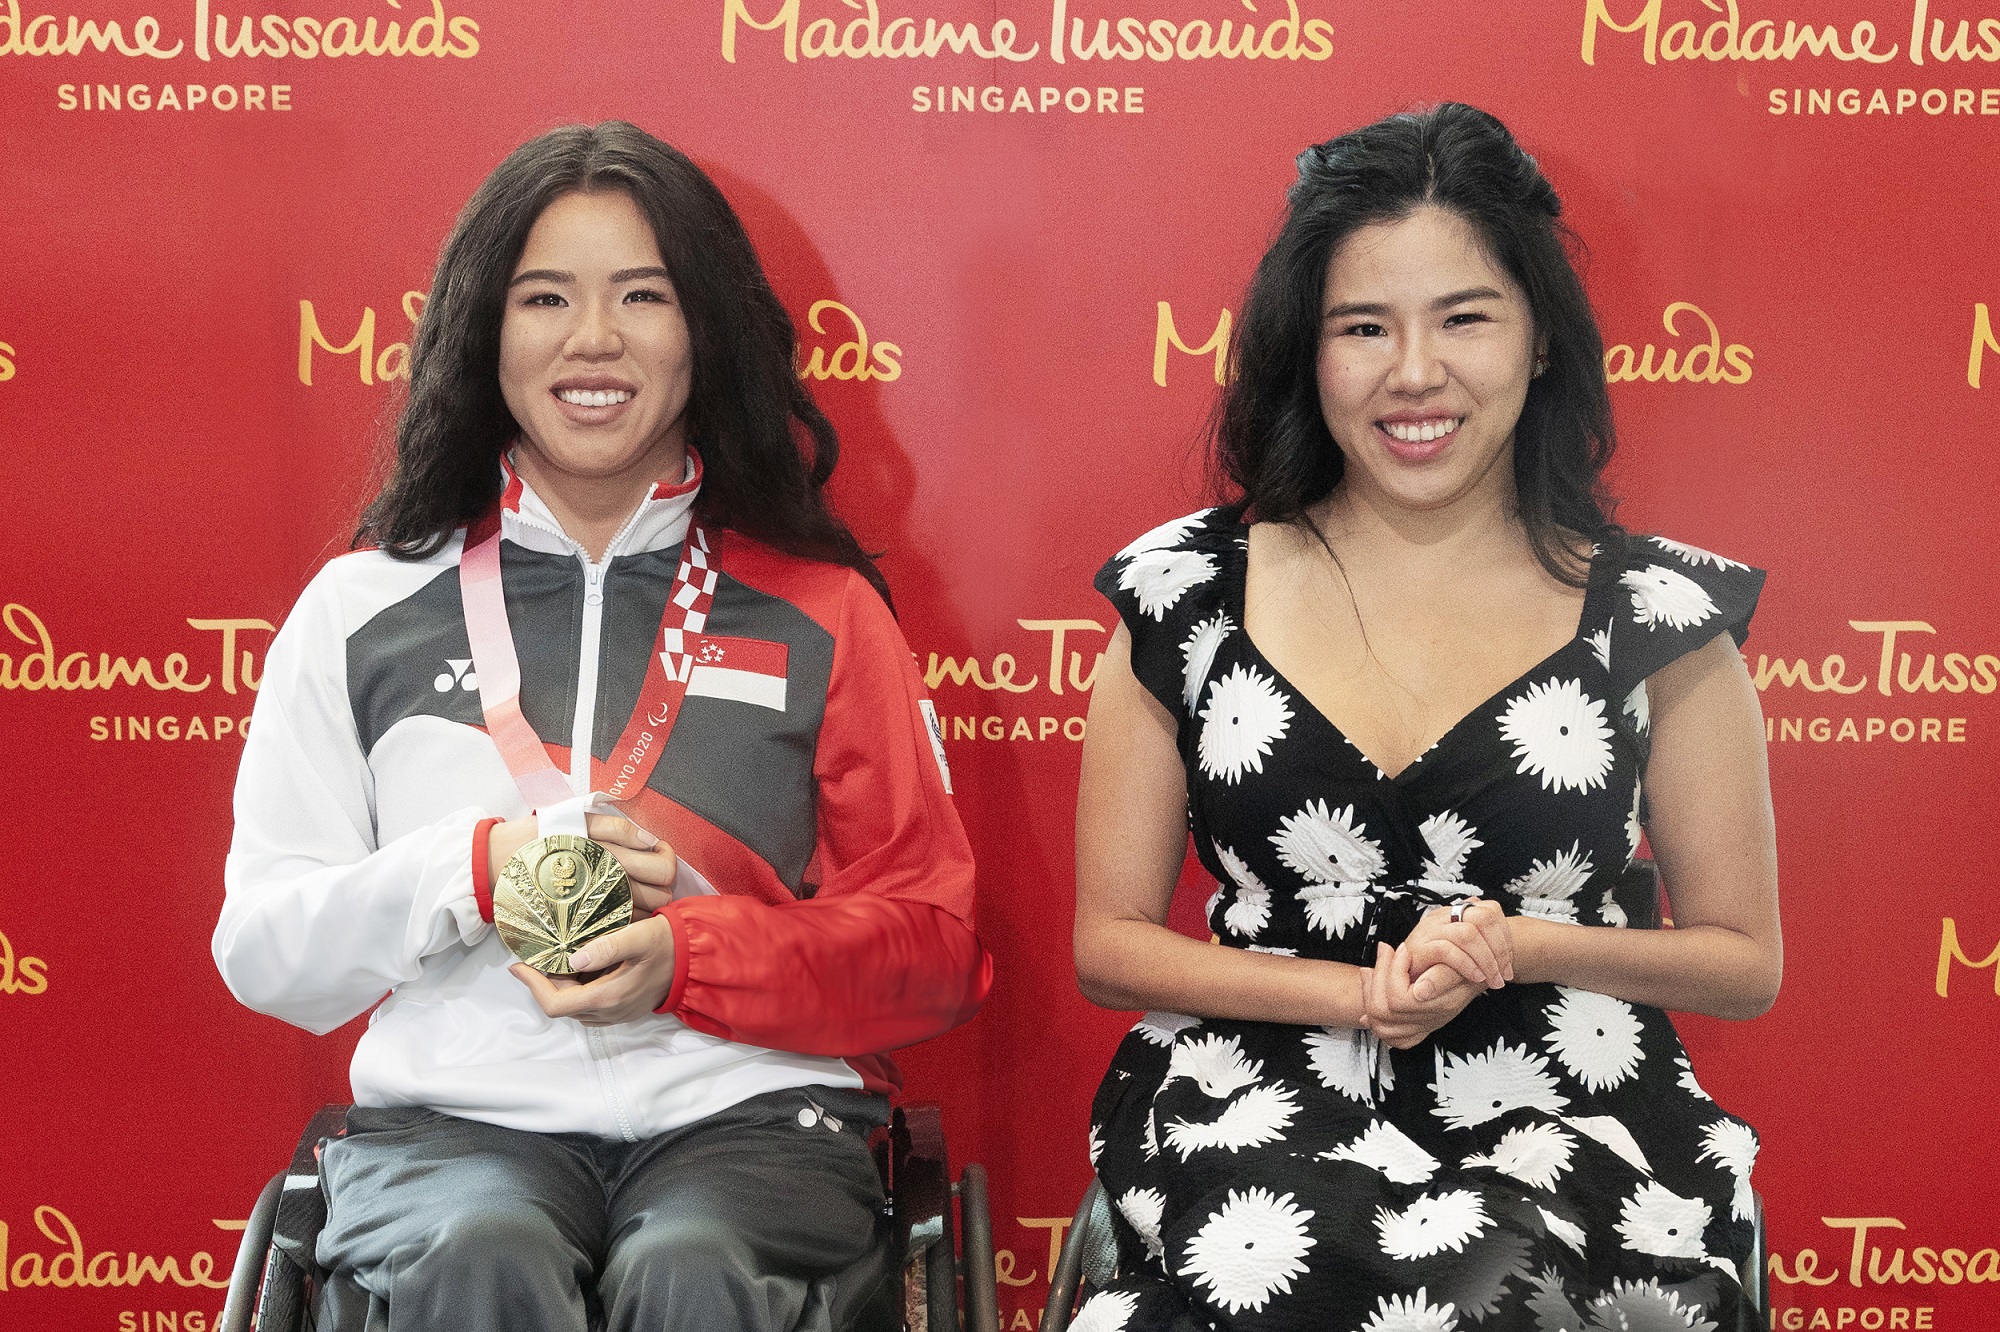 Yip Pin Xiu, five-time Paralympic gold medallist and para swimmer strikes a pose with Madame Tussauds’ wax figure. (Photo: Madame Tussauds Singapore)